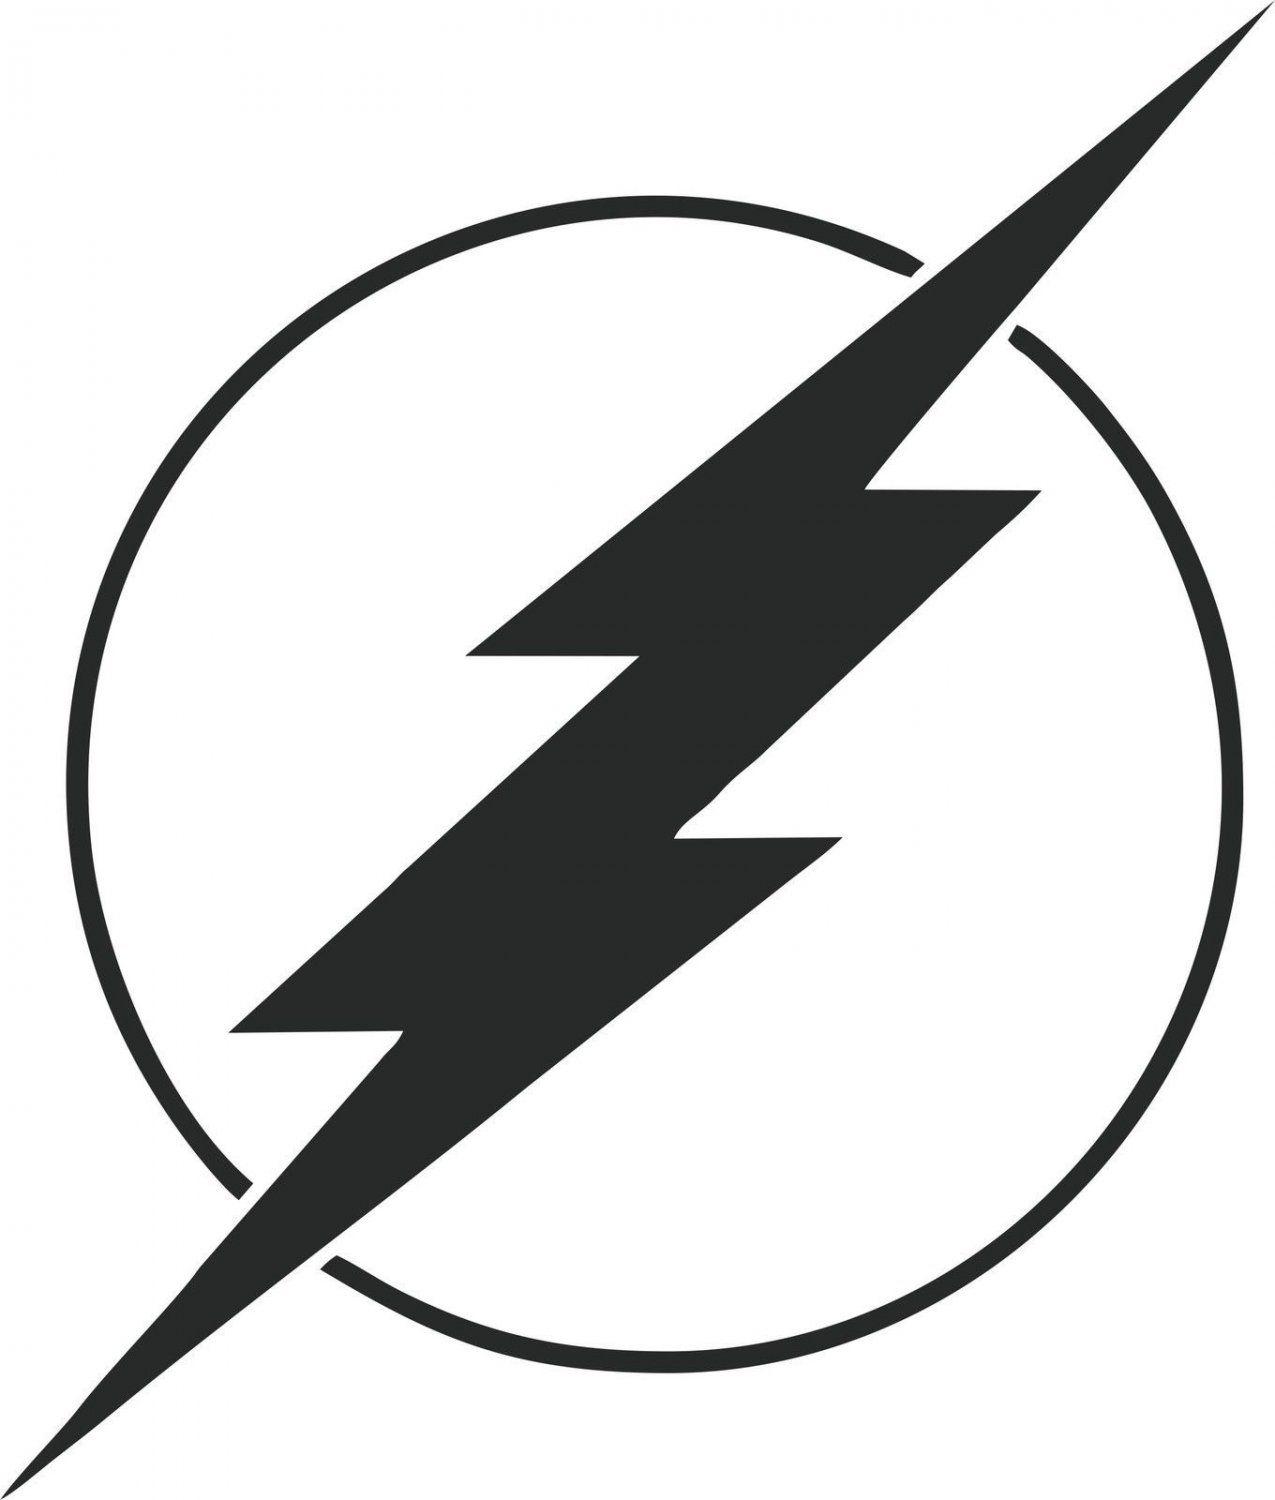 lighting bolt with white circle for mac app